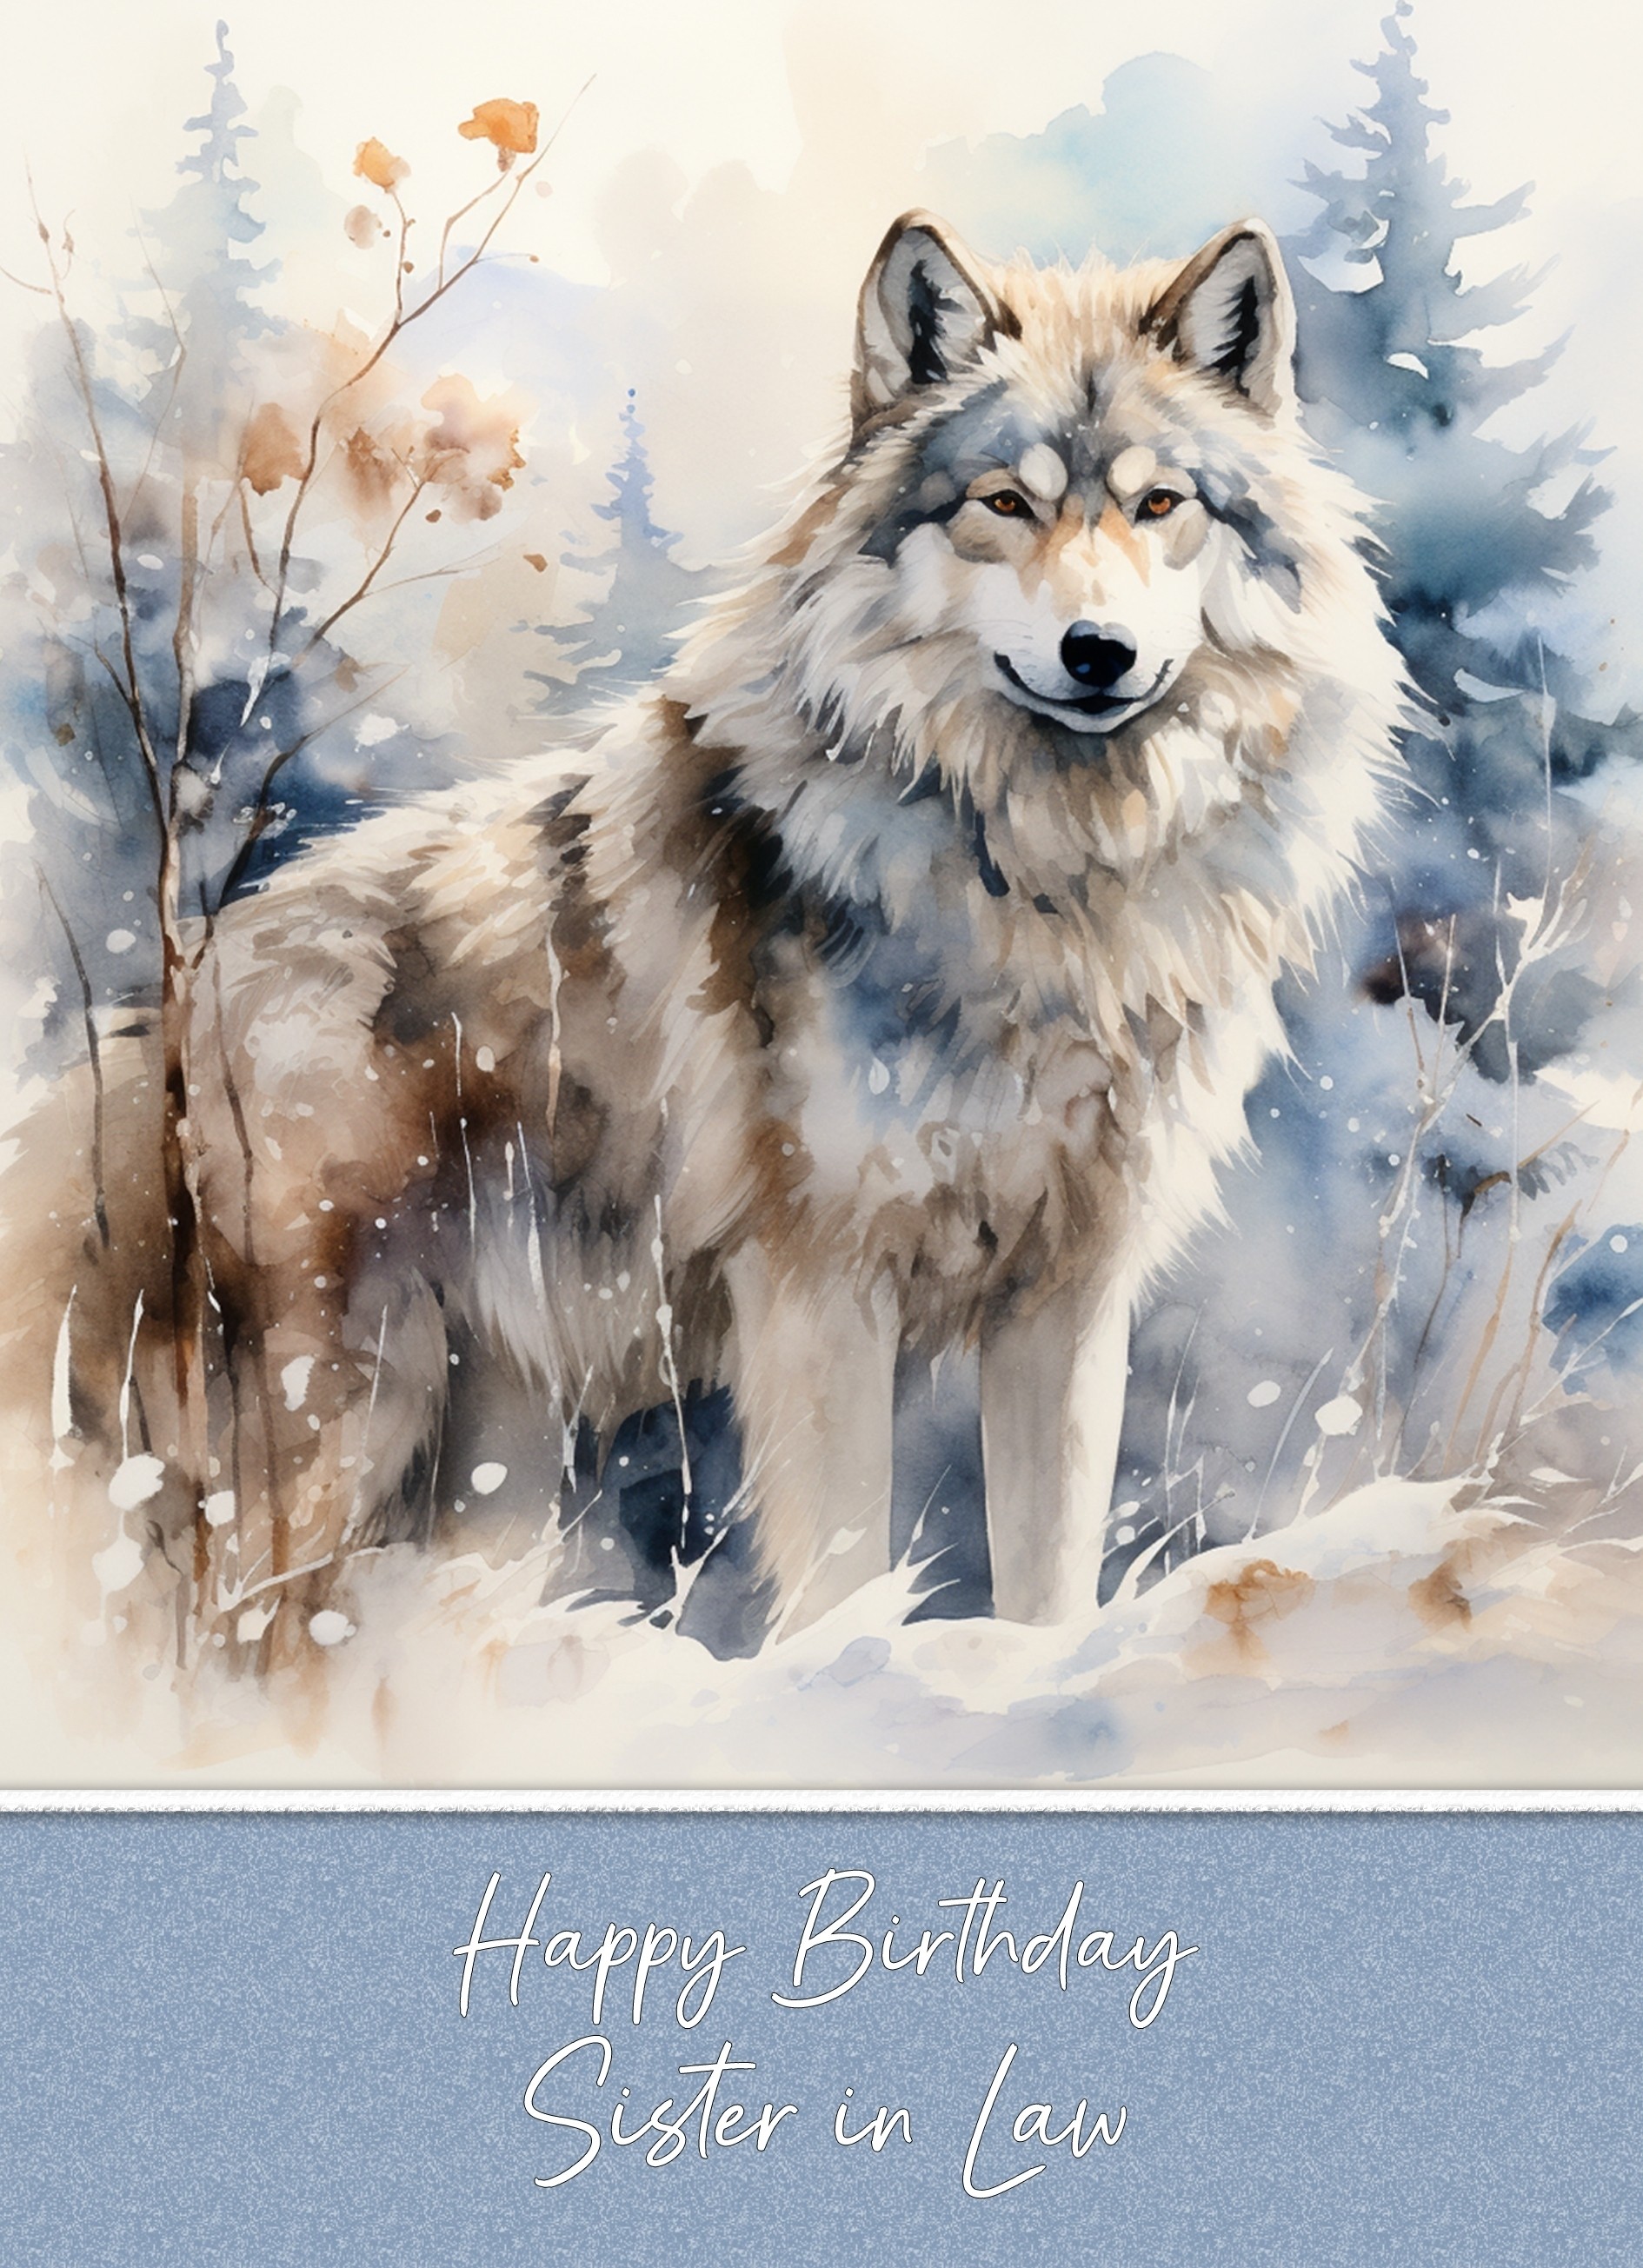 Birthday Card For Sister in Law (Fantasy Wolf Art)